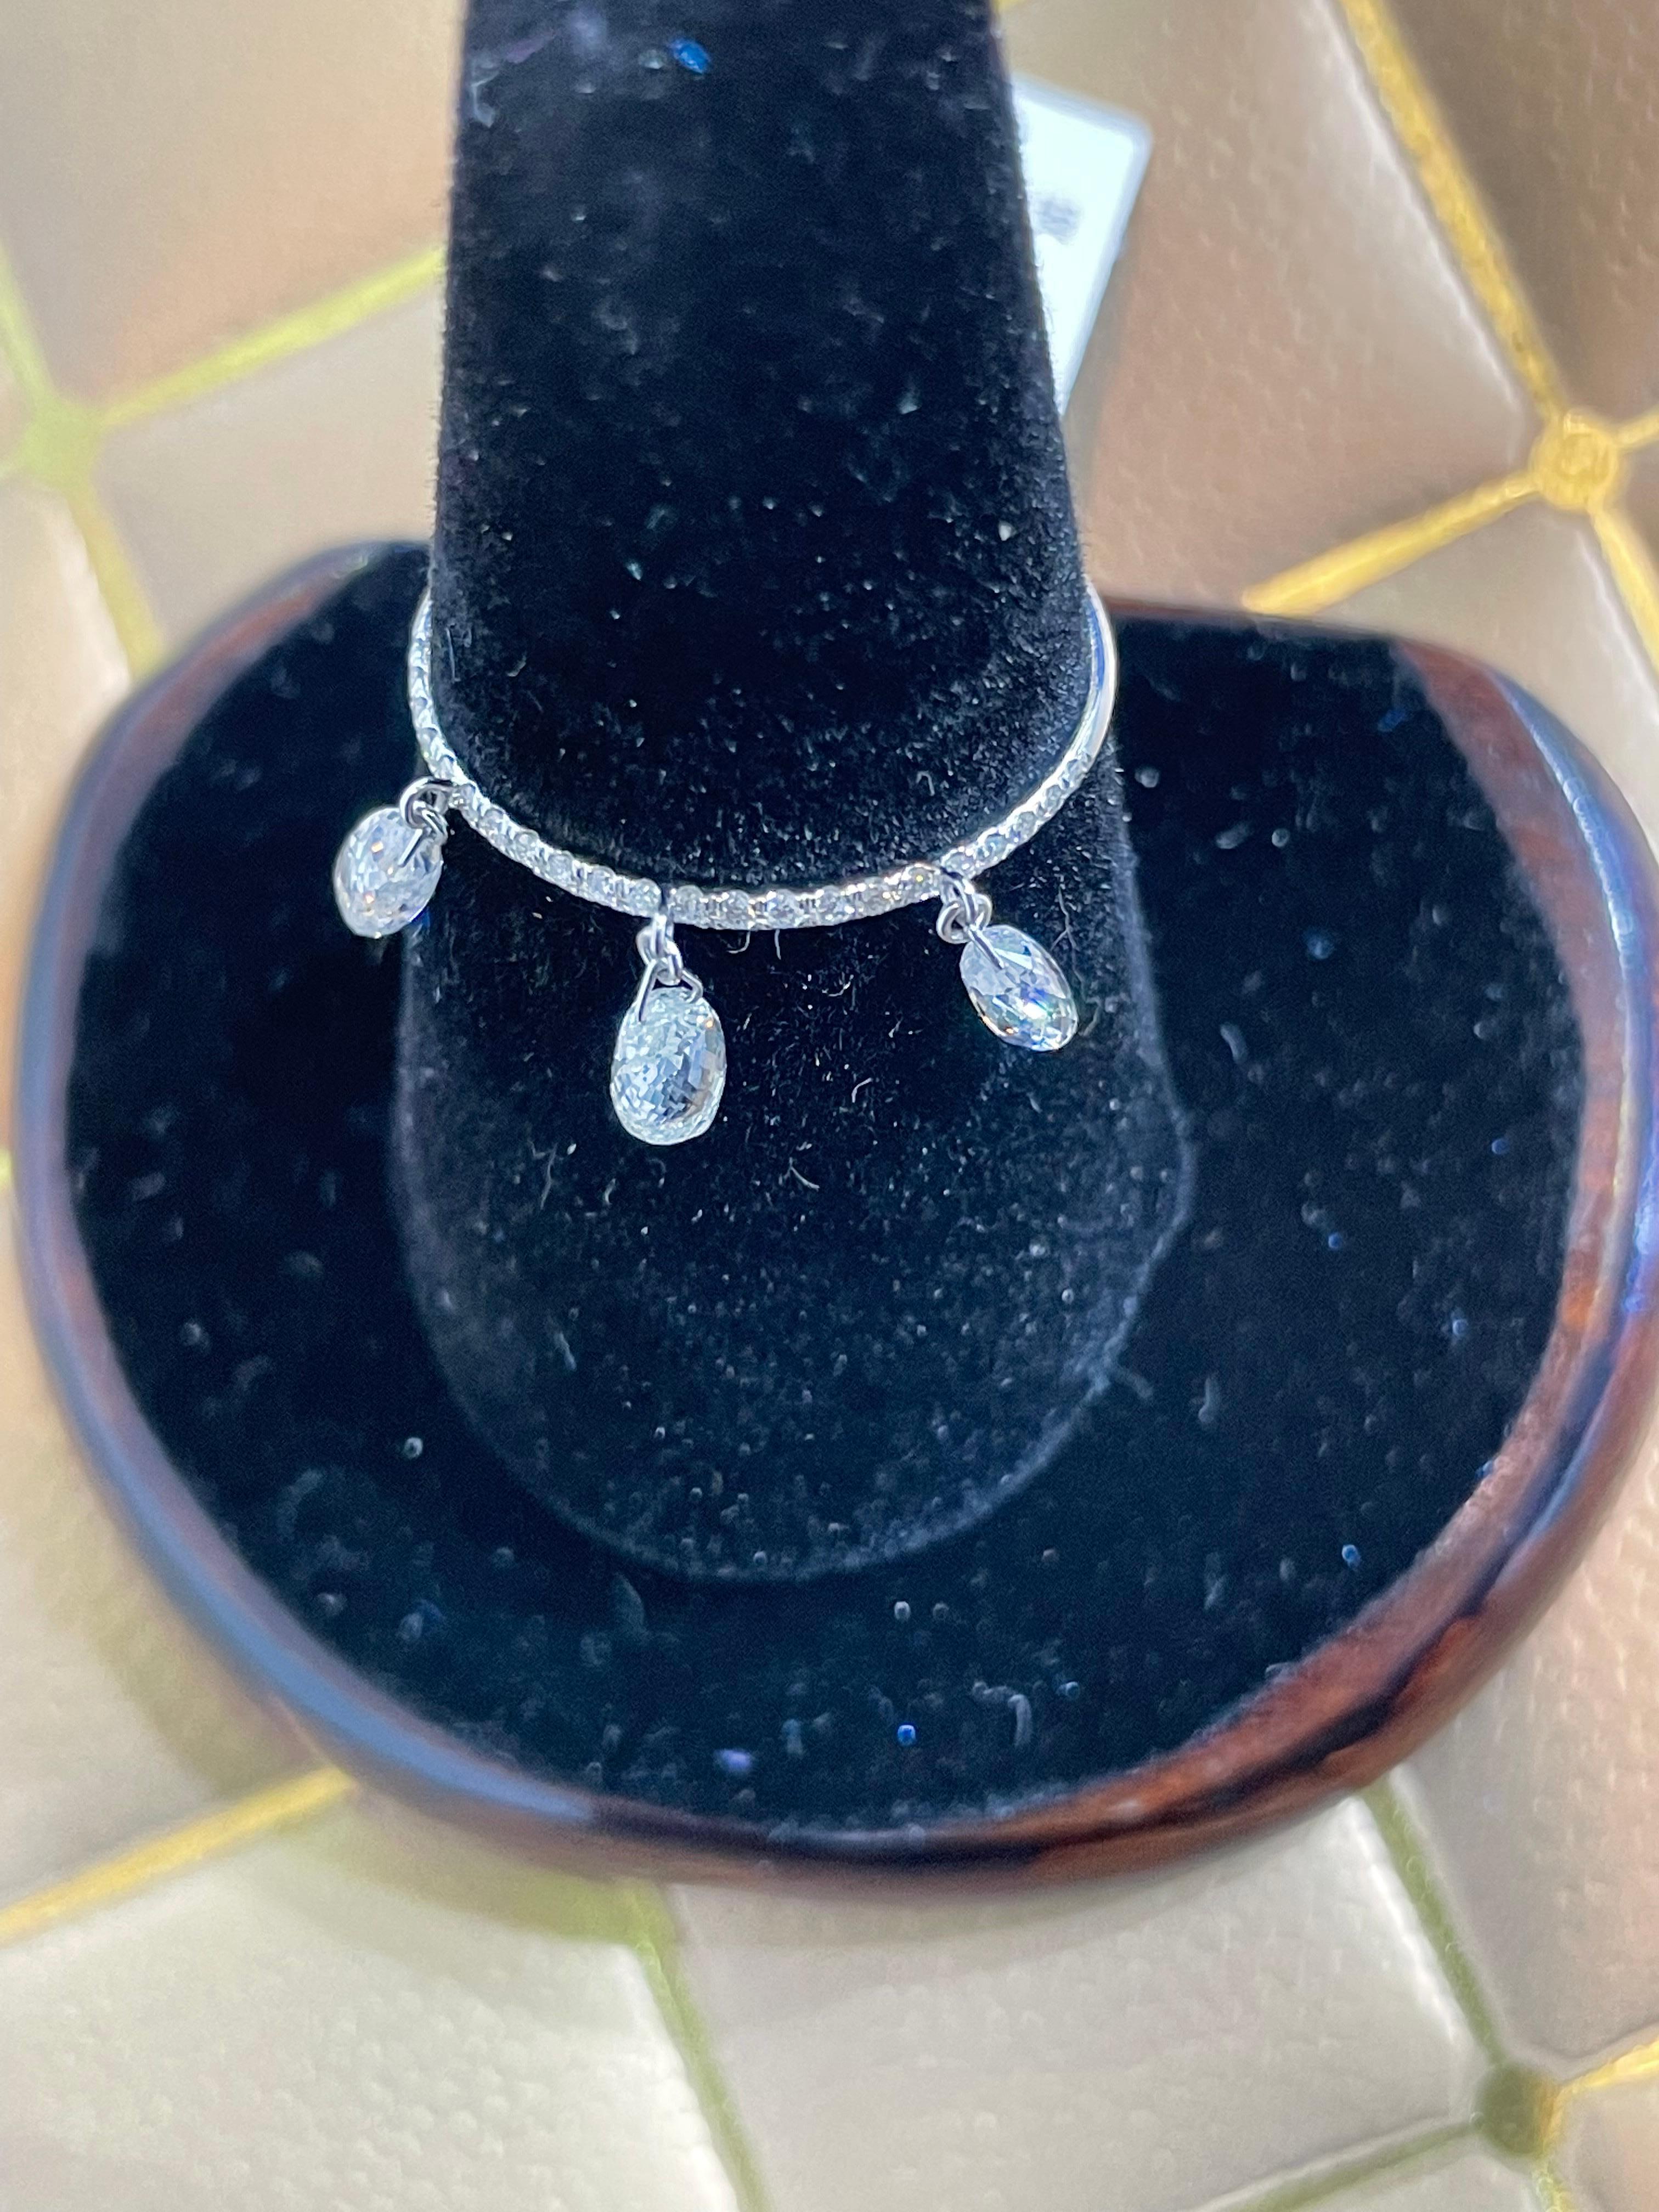 PANIM Briolette Diamond 18K White Gold Dangling Ring

Inspired by the beauty of a rain drop, Our Briolette Dangling diamond ring is an absolute show-stopper.
It has 3 piece of Rain Drops White Diamond Briolettes with diamond band having smaller